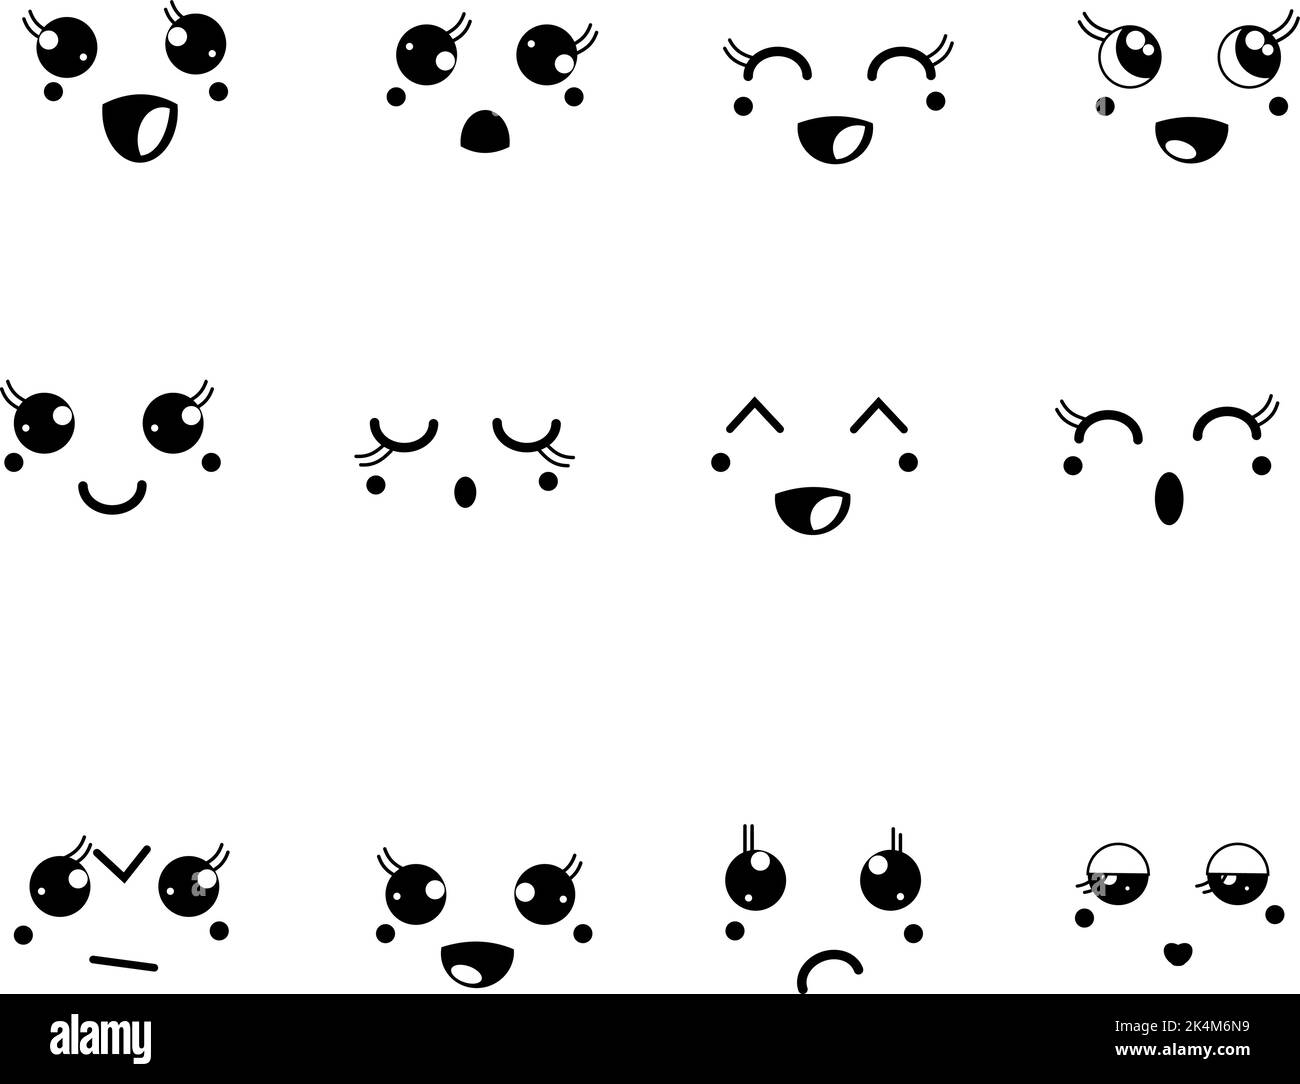 Fun emoticons, illustration, vector on a white background. Stock Vector